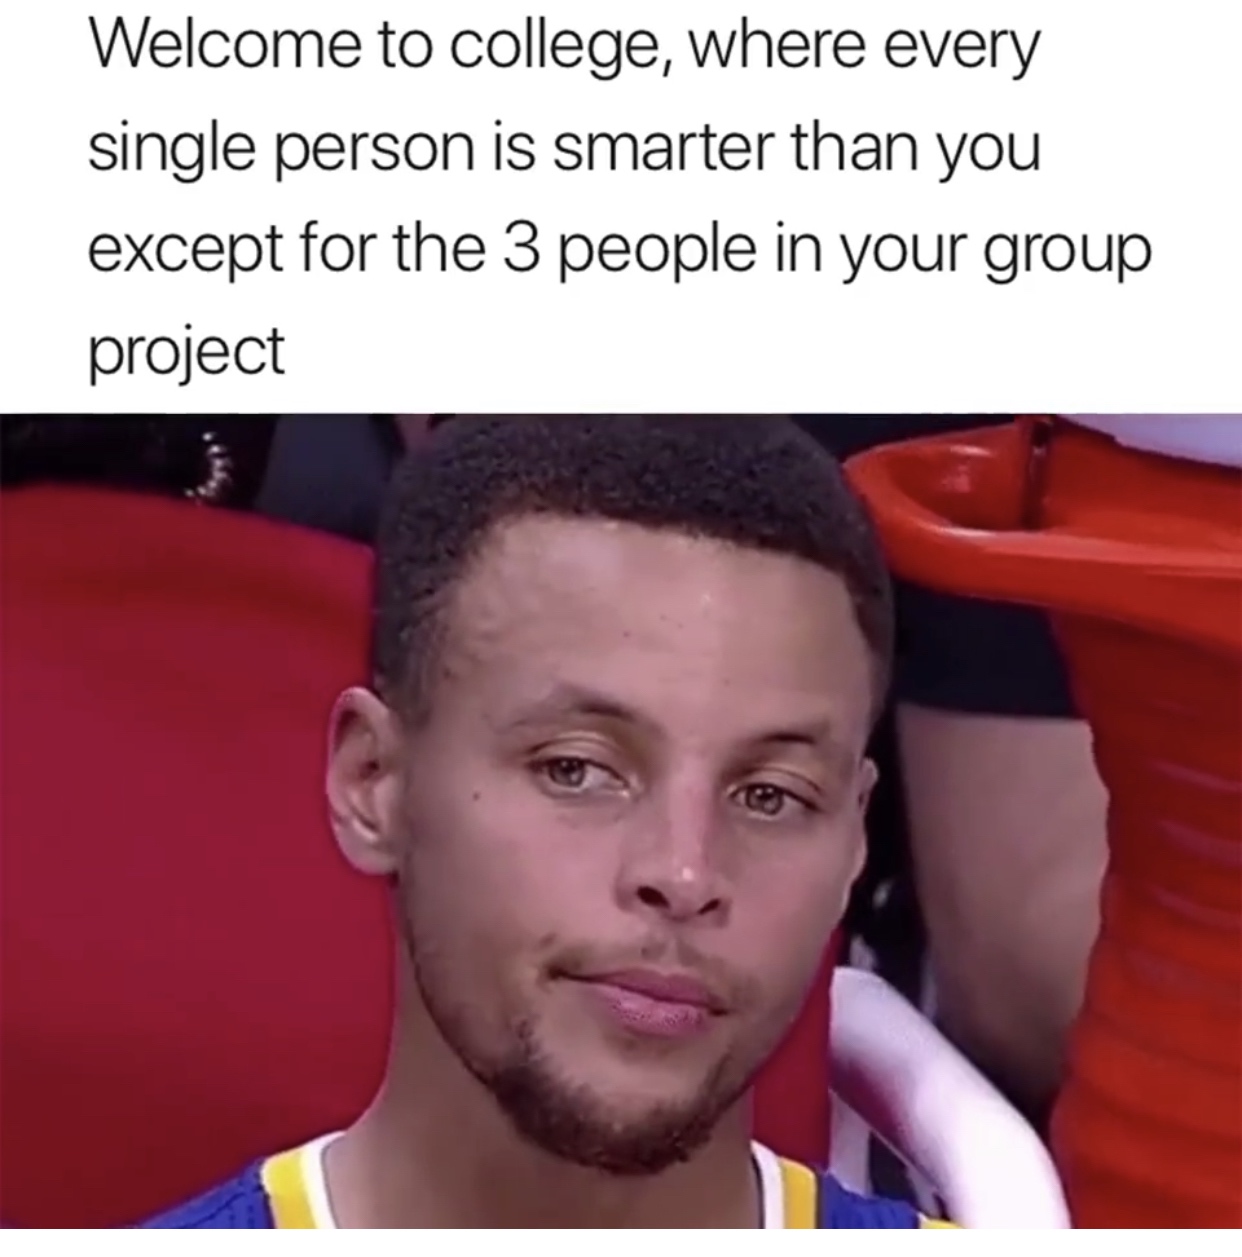 Meme - Welcome to college, where every single person is smarter than you except for the 3 people in your group project